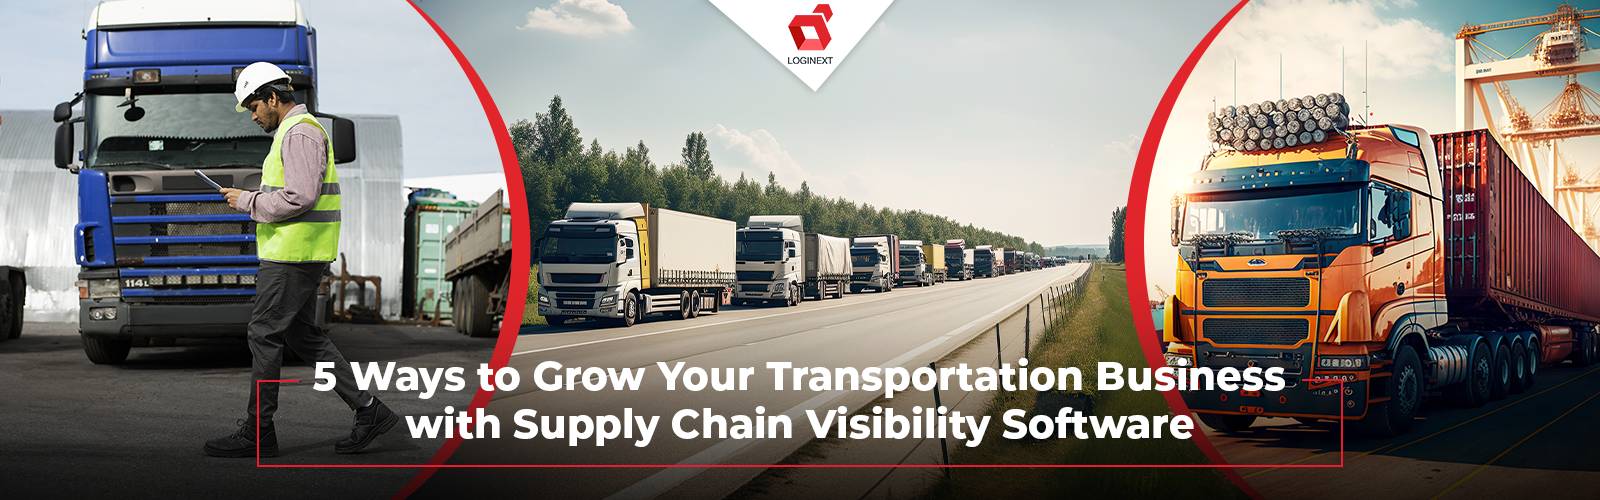 From Zero Visibility to End-to-End Control: 5 Ways to Grow Your Transportation Business with Supply Chain Visibility Software